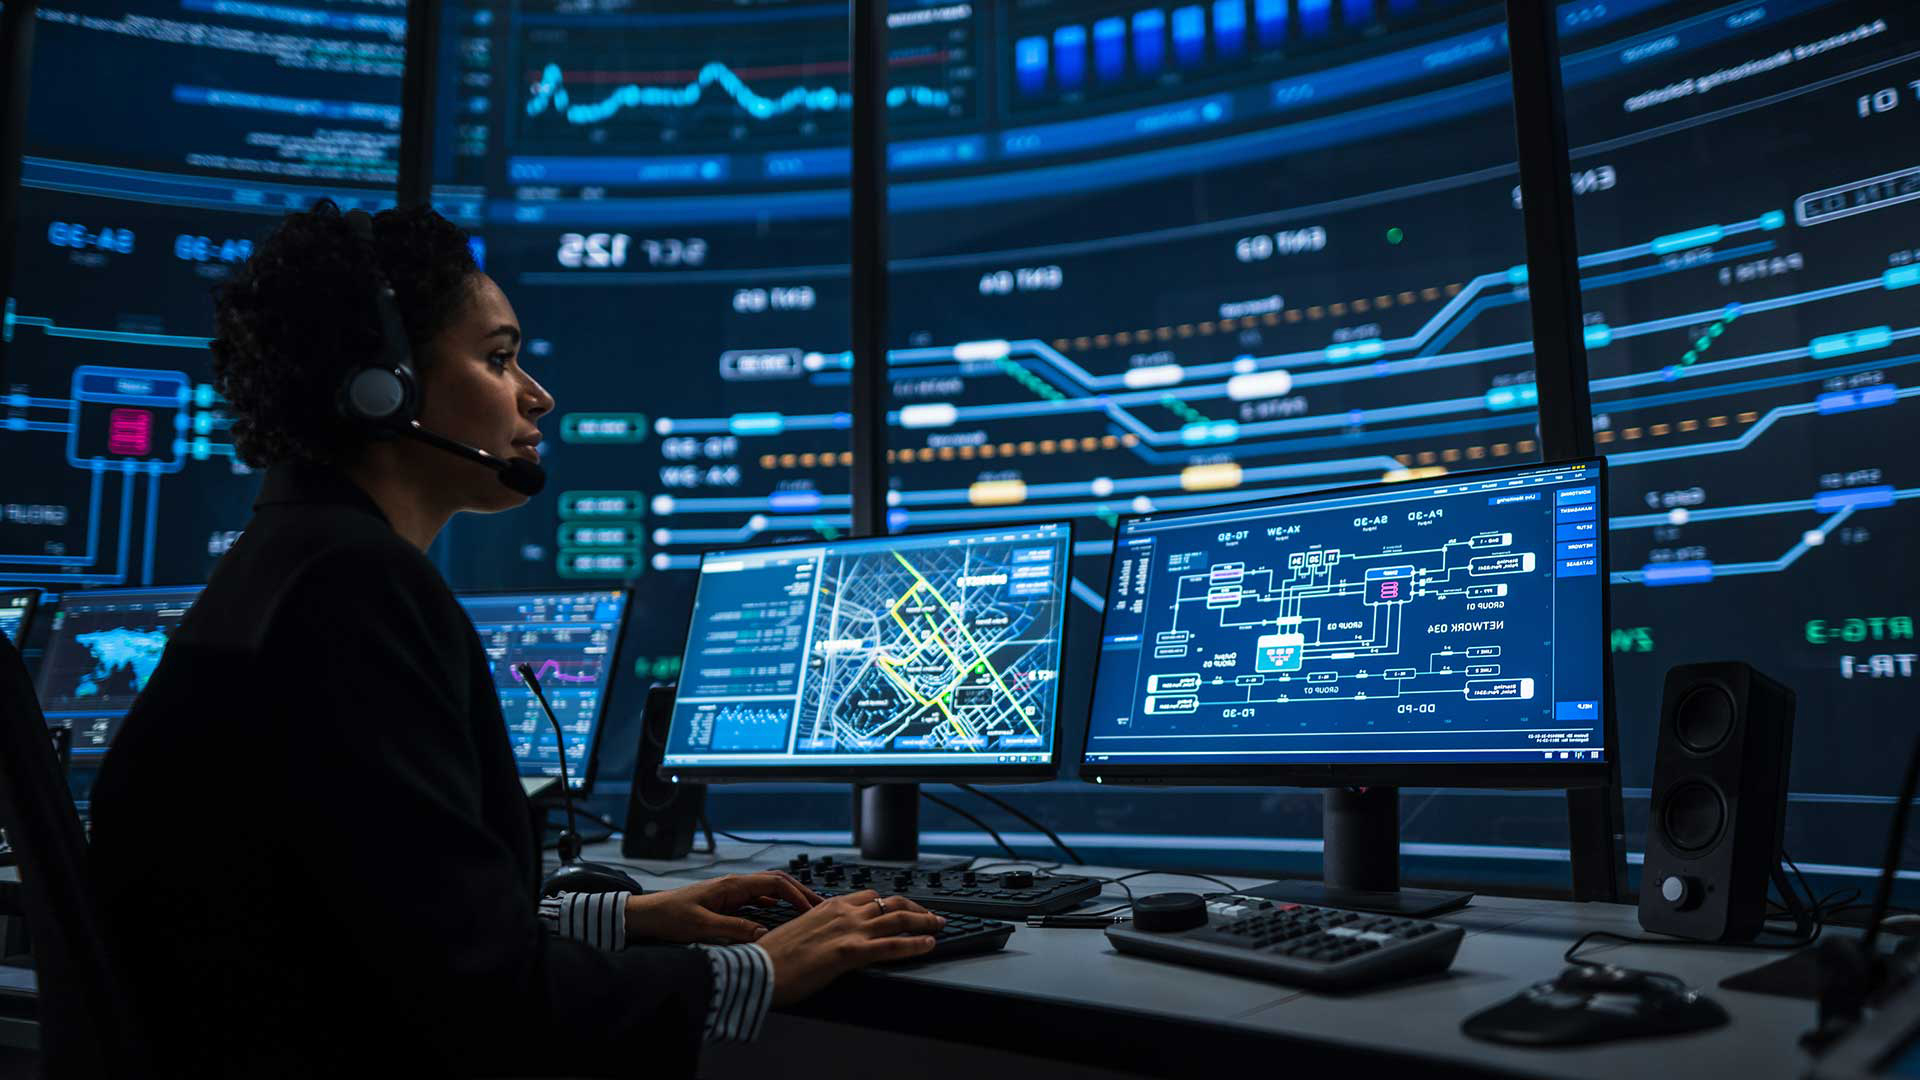 African American woman monitoring Network Operations Center Screens with futuristic video wall